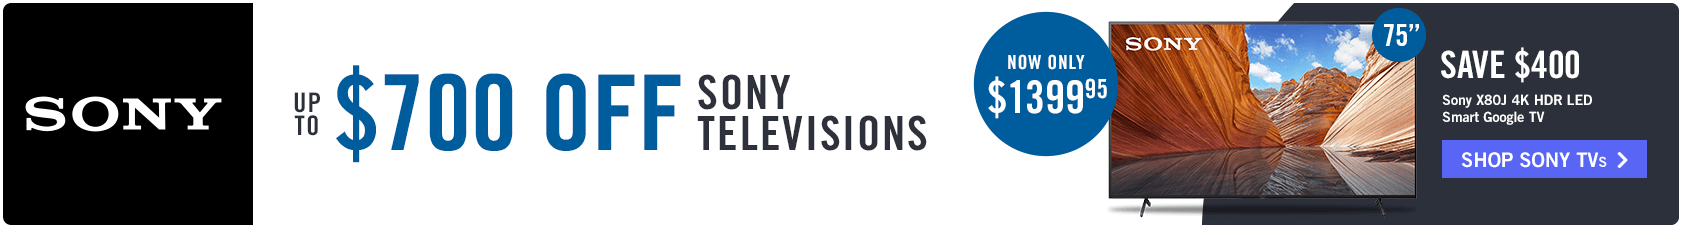 Save up to $700 on Sony Televisions Sony